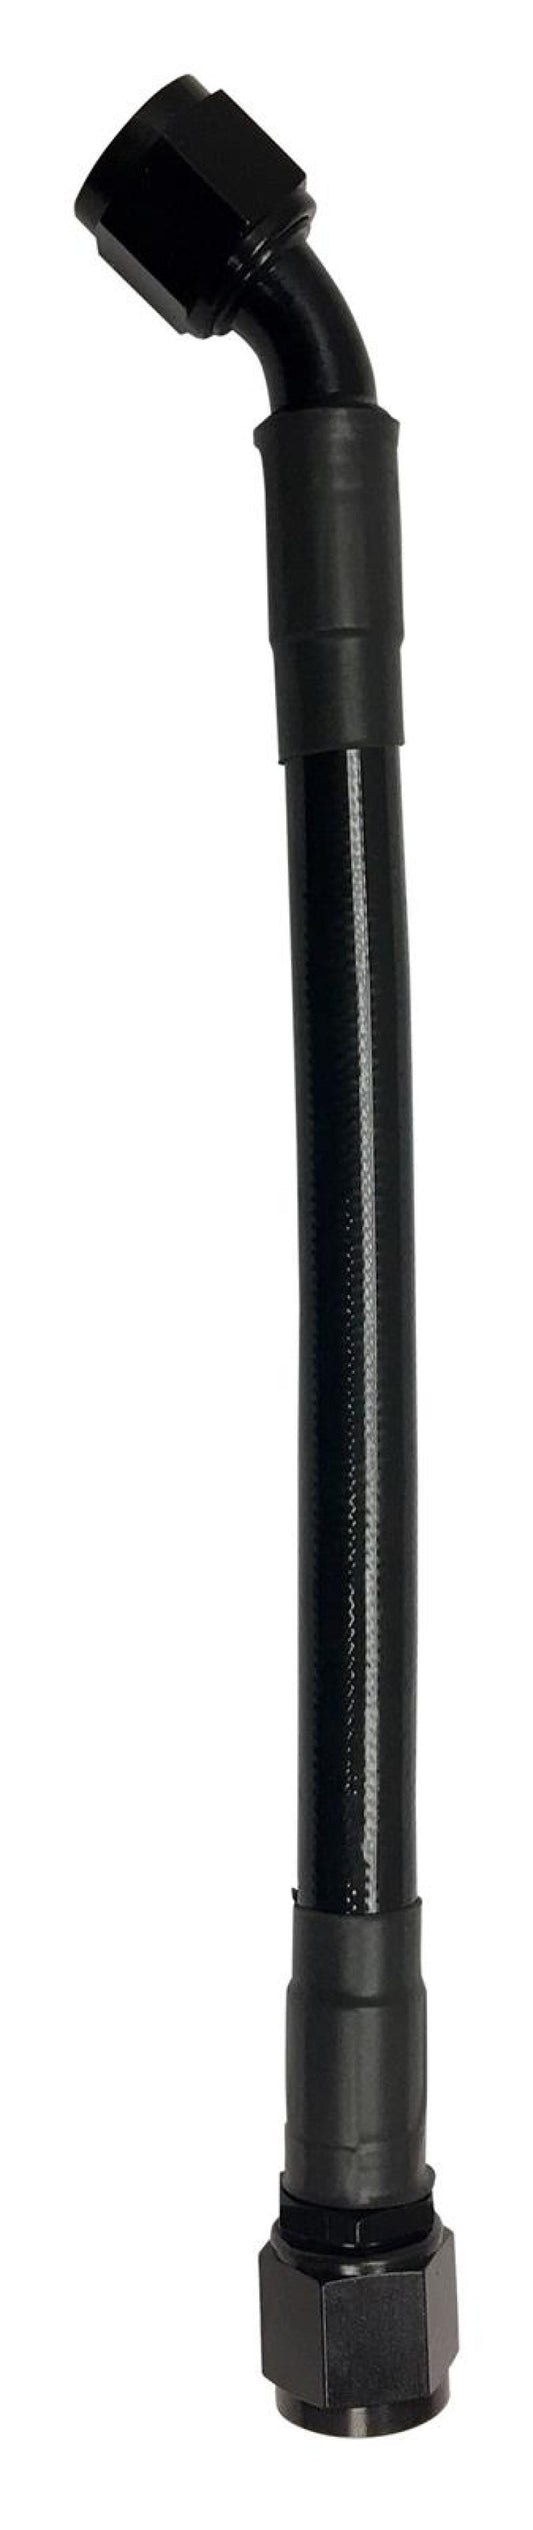 Fragola -10AN Ext Black PTFE Hose Assembly Straight x 45 Degree 20in